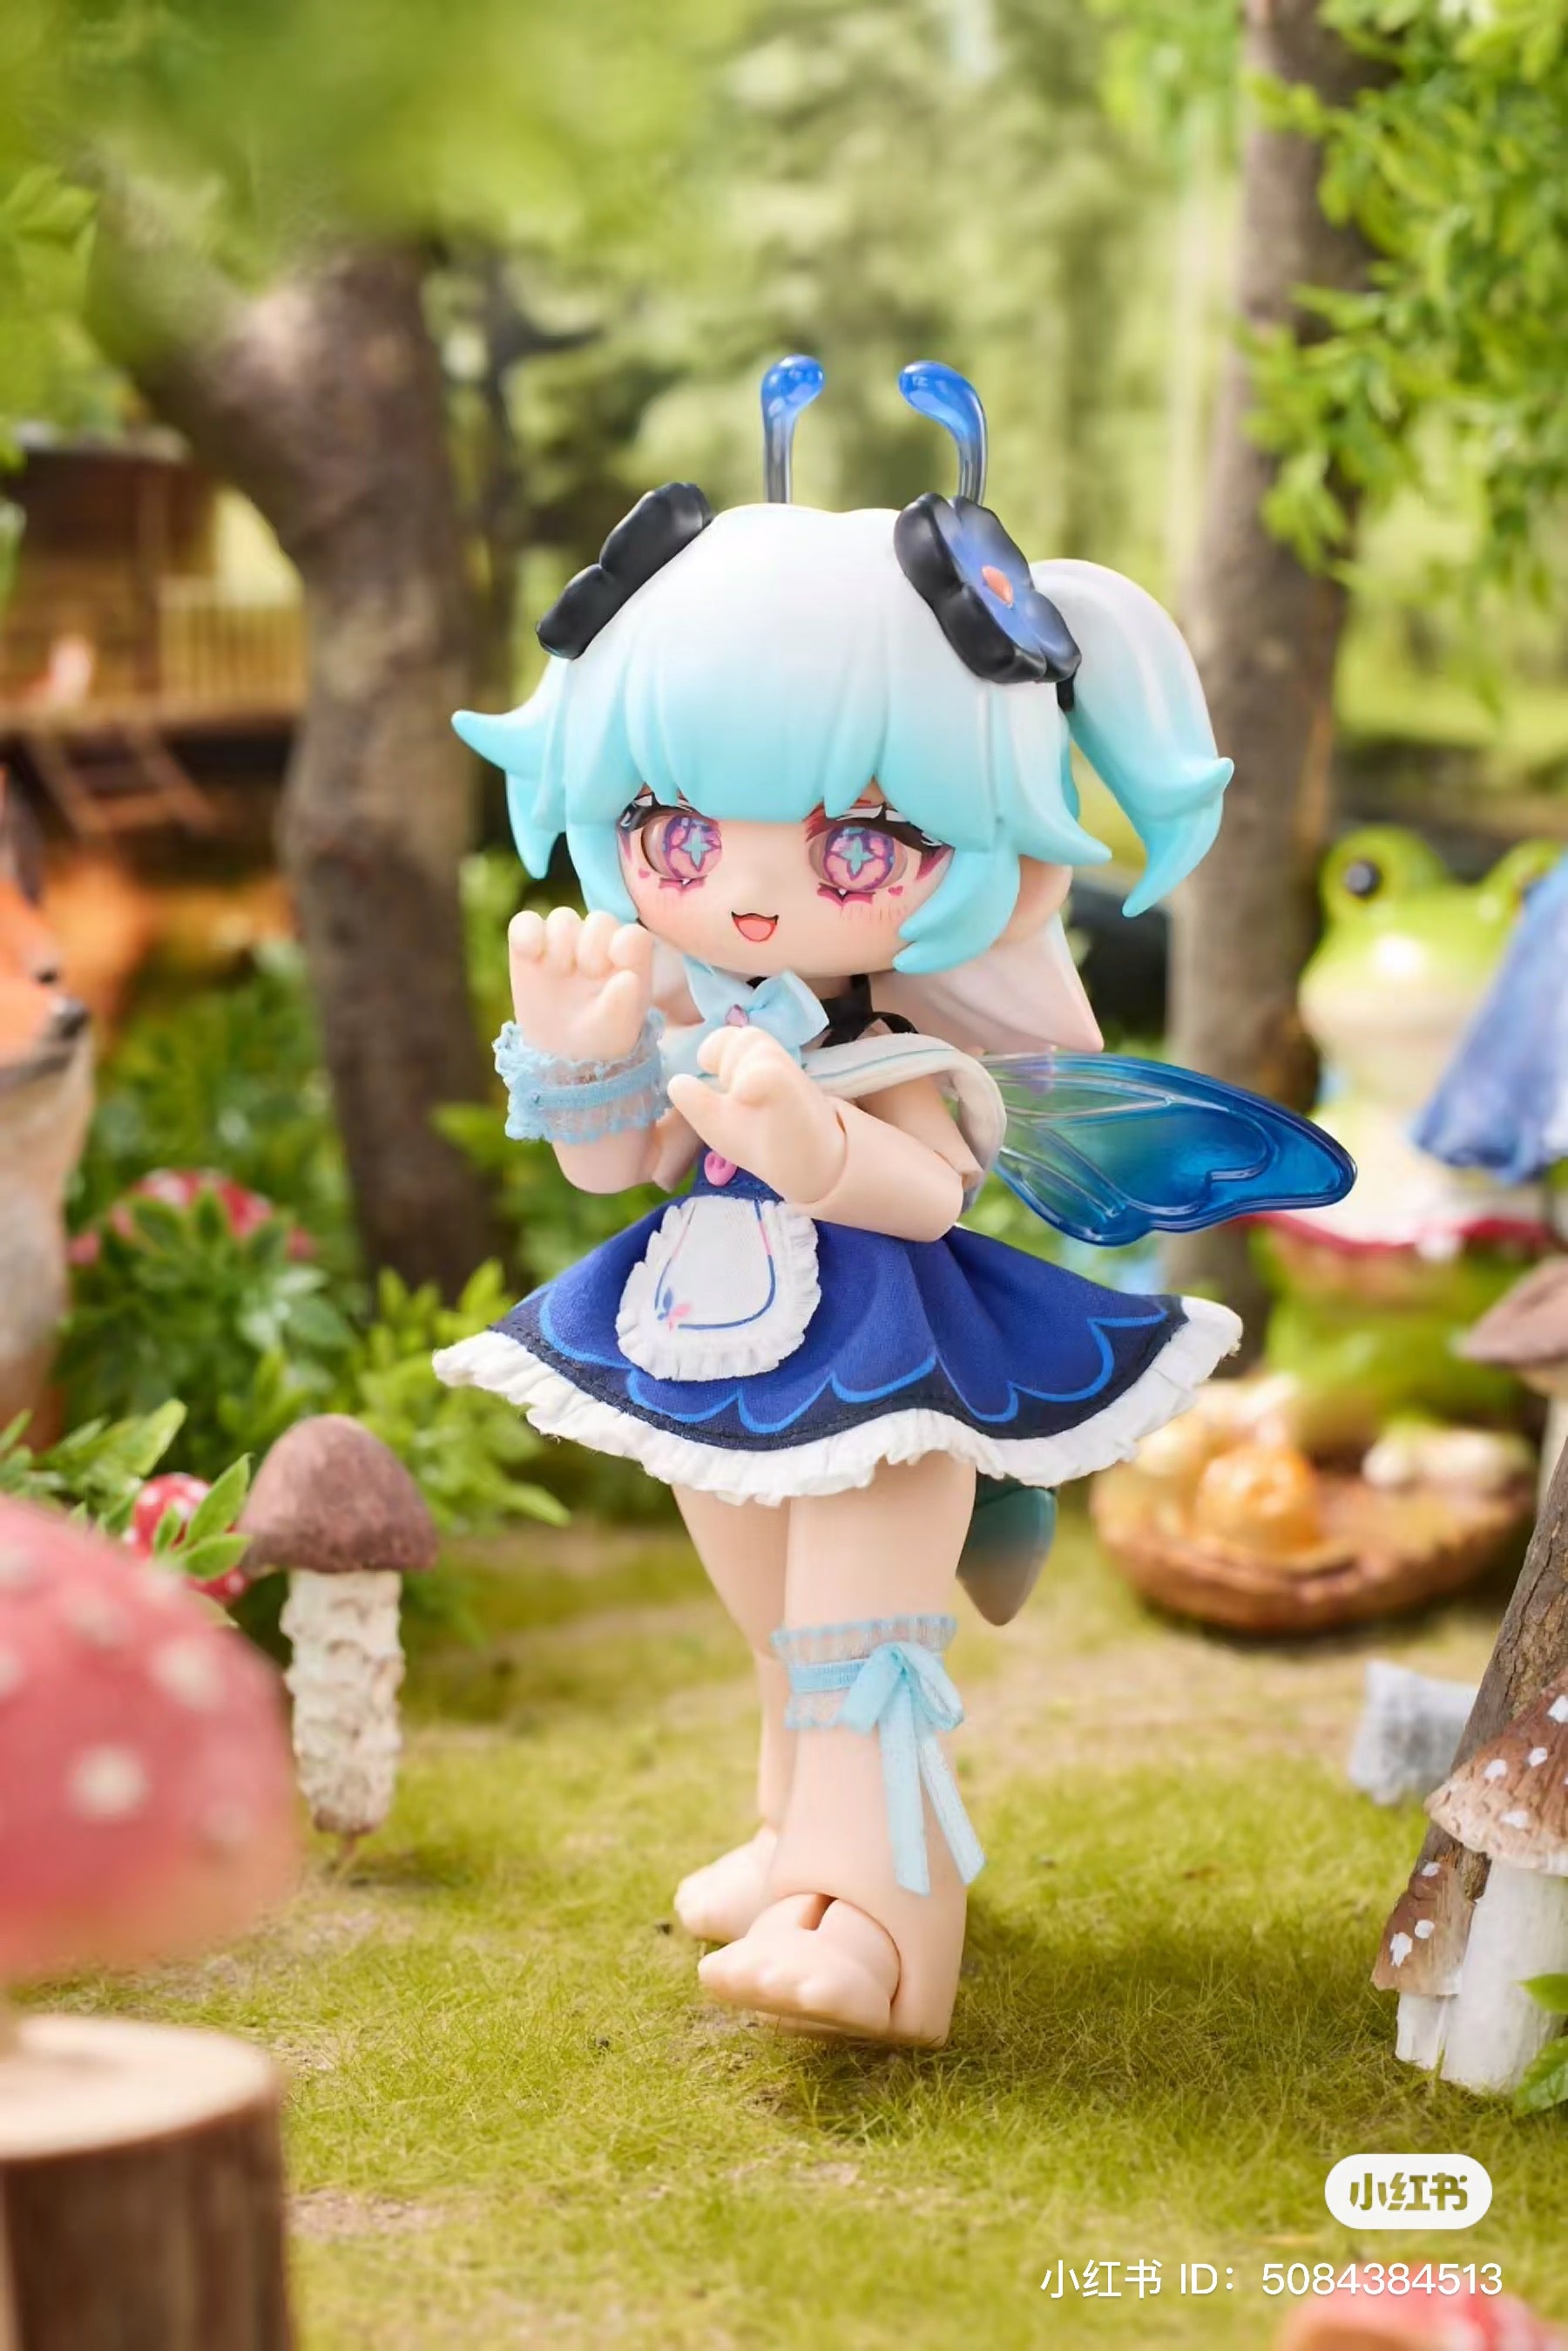 A toy figurine of a fairy in a garden and a doll with blue hair and wings from the Kukaka Insect Cafe BJD Blind Box Series.